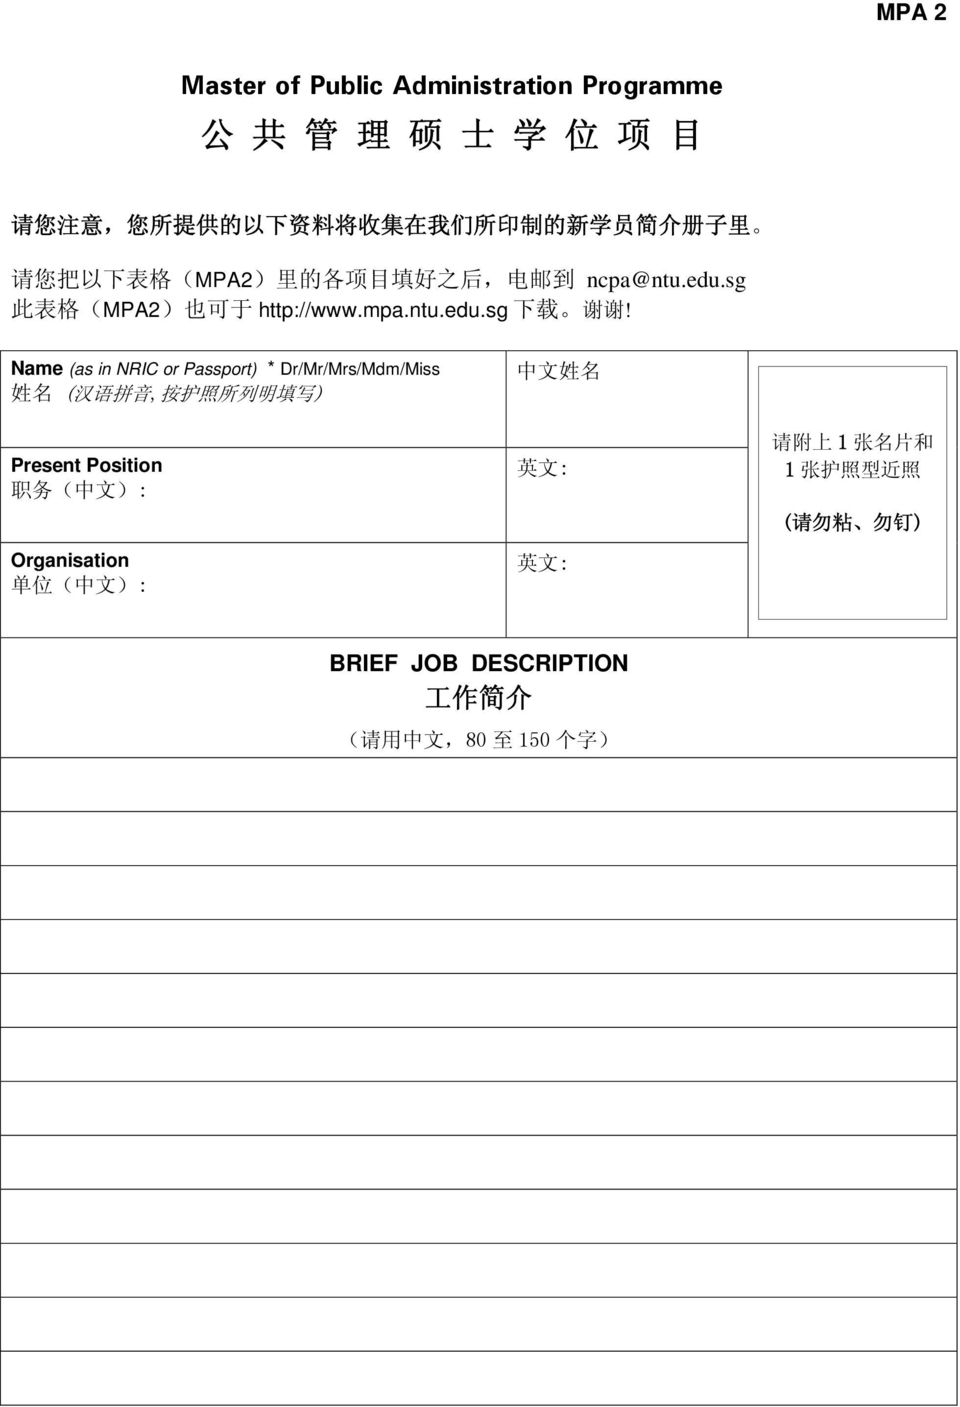 Name (as in NRIC or Passport) Dr/Mr/Mrs/Mdm/Miss 姓 名 ( 汉 语 拼 音, 按 护 照 所 列 明 填 写 ) Present Position 职 务 ( 中 文 ):